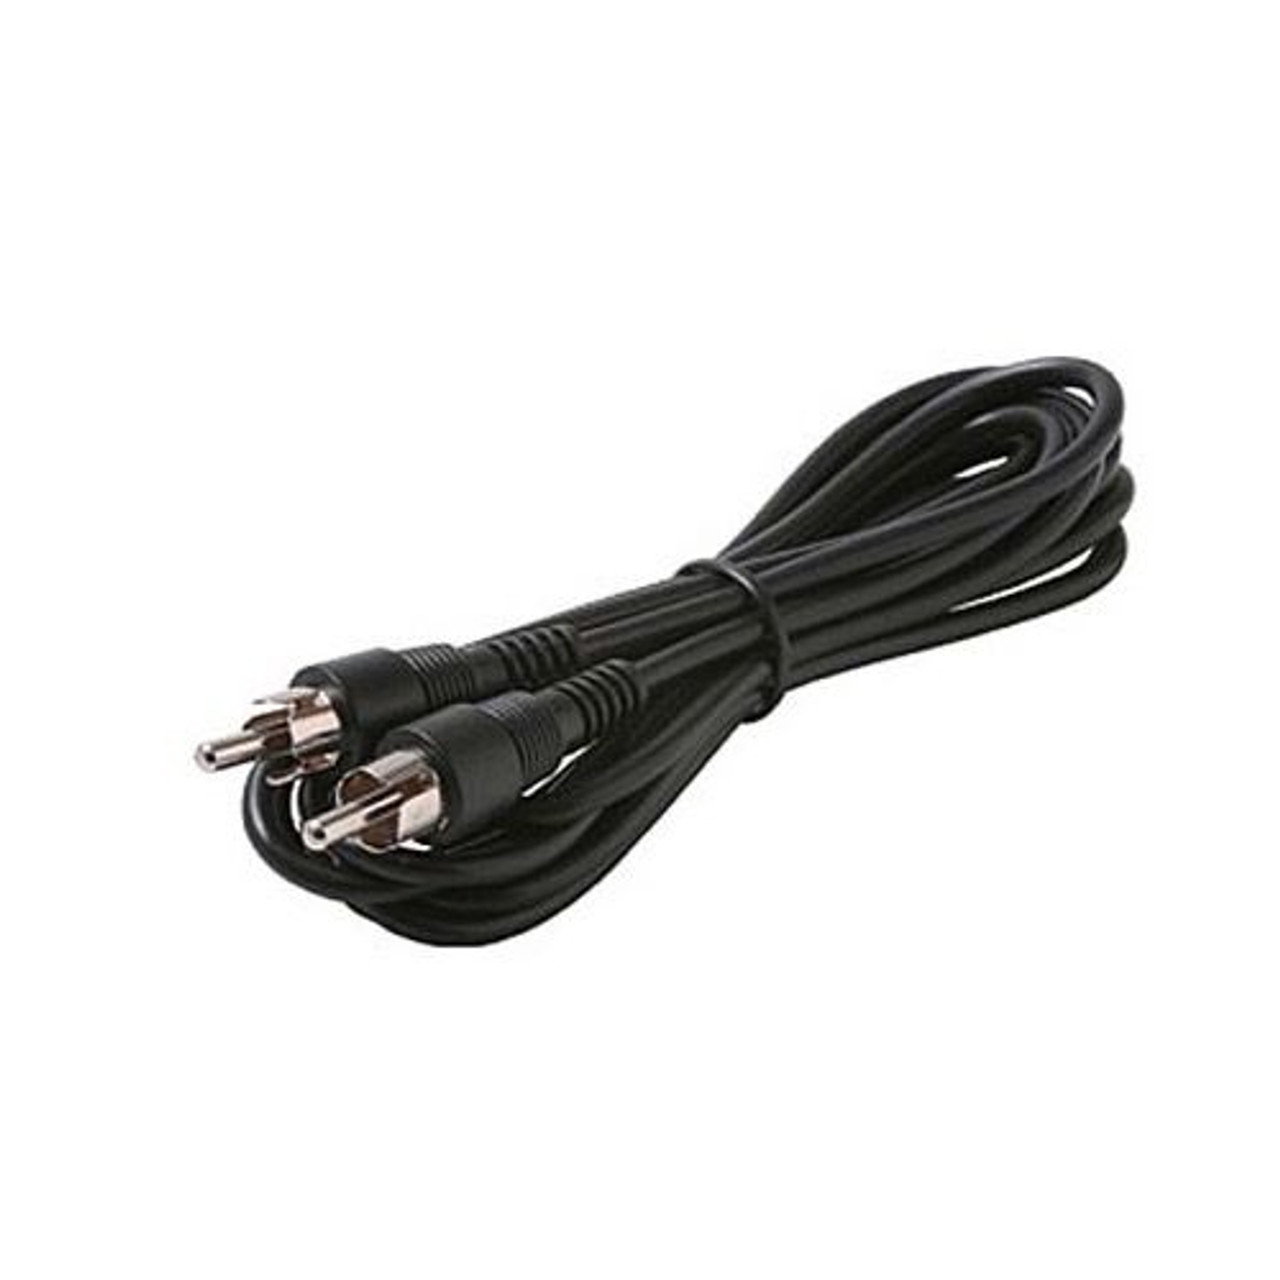 Steren 255-117 25' FT RCA Plug to RCA Plug Mono Audio Cable Black 95% Copper Shield Nickel Plate with Moulded Push-On Connectors 26 AWG Component Signal Receivers, Part # 255117